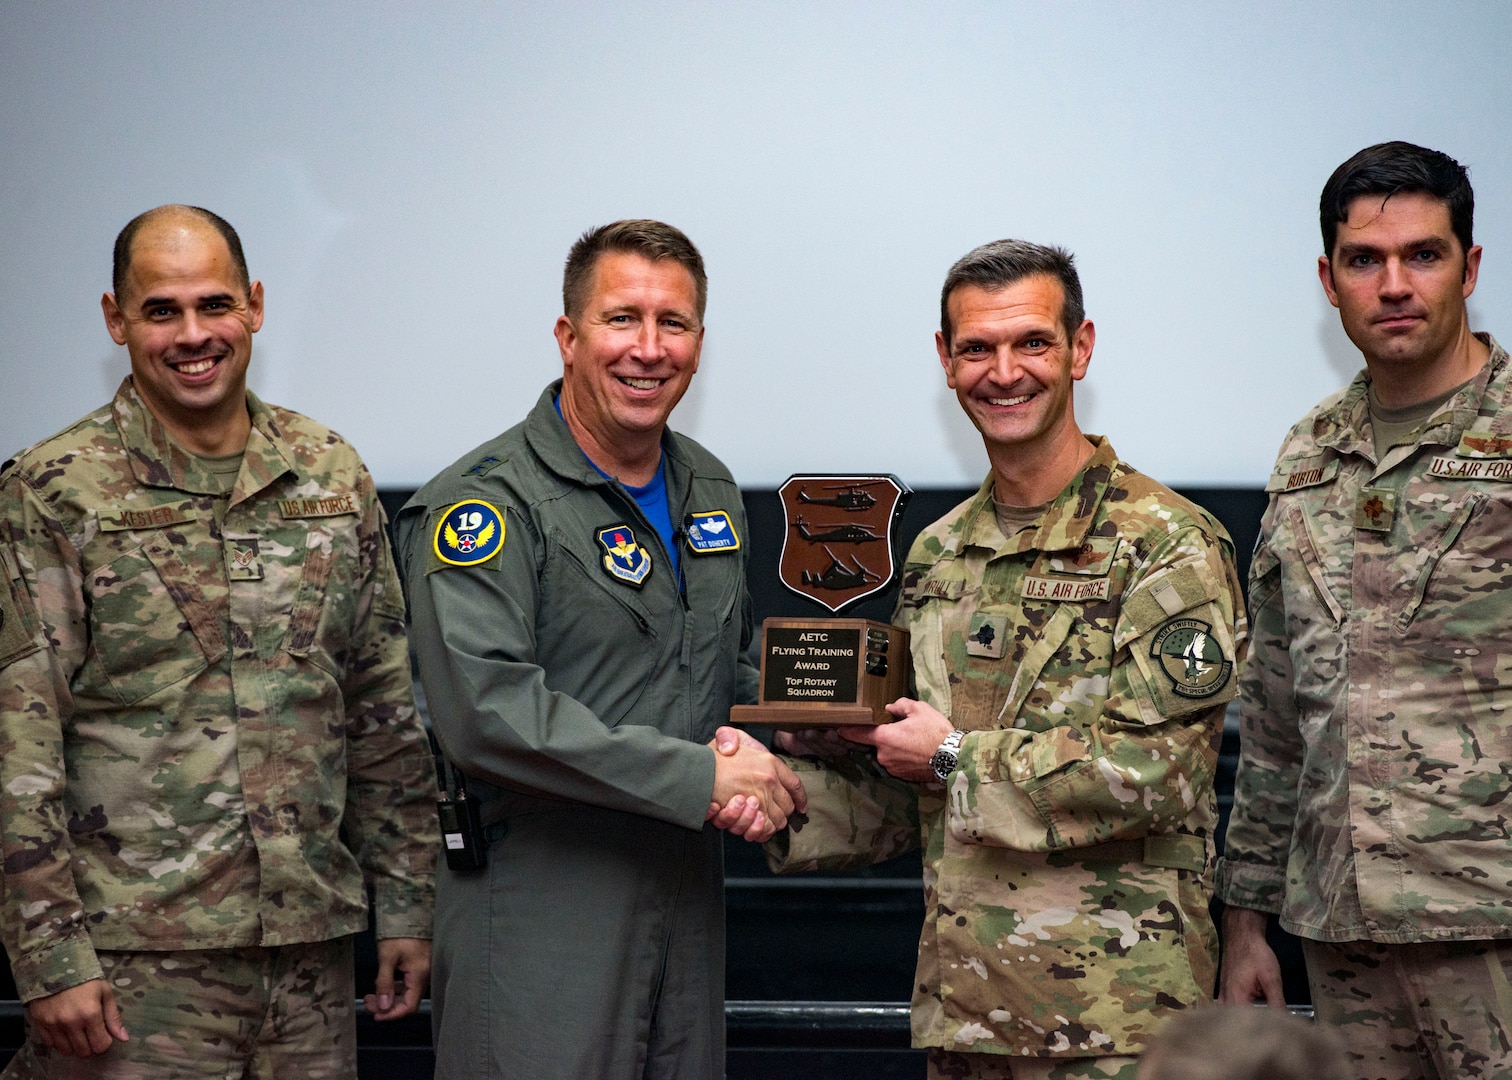 Maj. Gen. Patrick Doherty, 19th Air Force commander, presents the Top Rotary Squadron Award to Lt. Col. Matthew Shrull, 71ST Special Operations Squadron commander, during the Air Education and Training Command Flying Training Awards Ceremony Oct. 26, 2018, at Joint Base San Antonio-Randolph, Texas. The award ceremony recognizes individuals, squadrons, groups and wings whose efforts have led to the highest levels of student production.